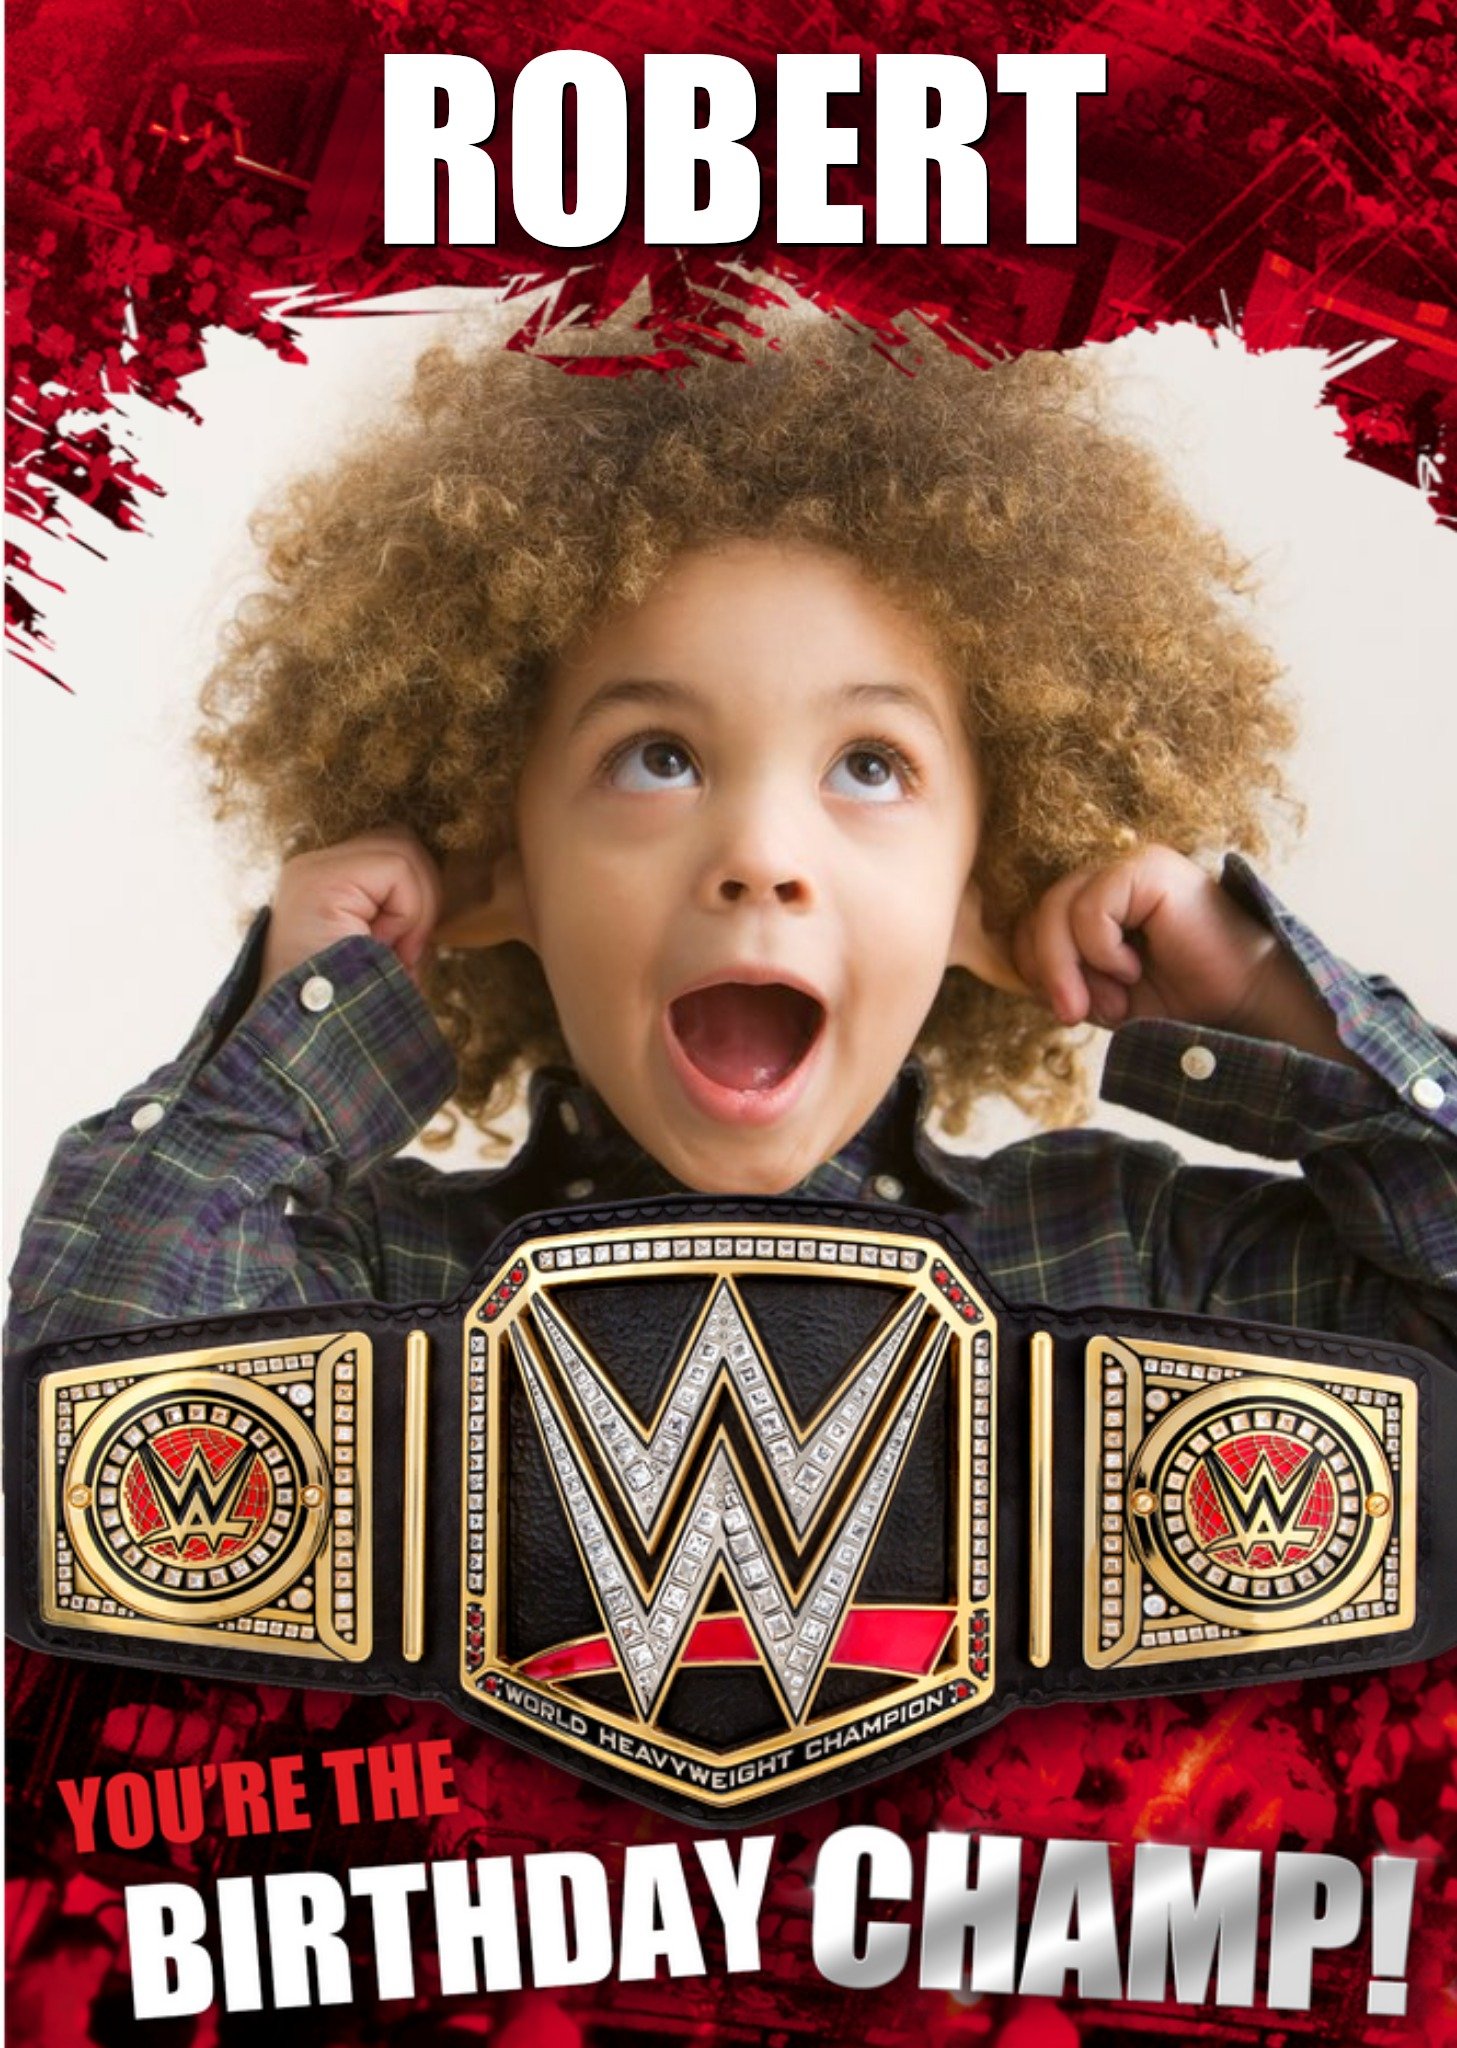 Wwe Birthday Card - You're The Birthday Champ, Large